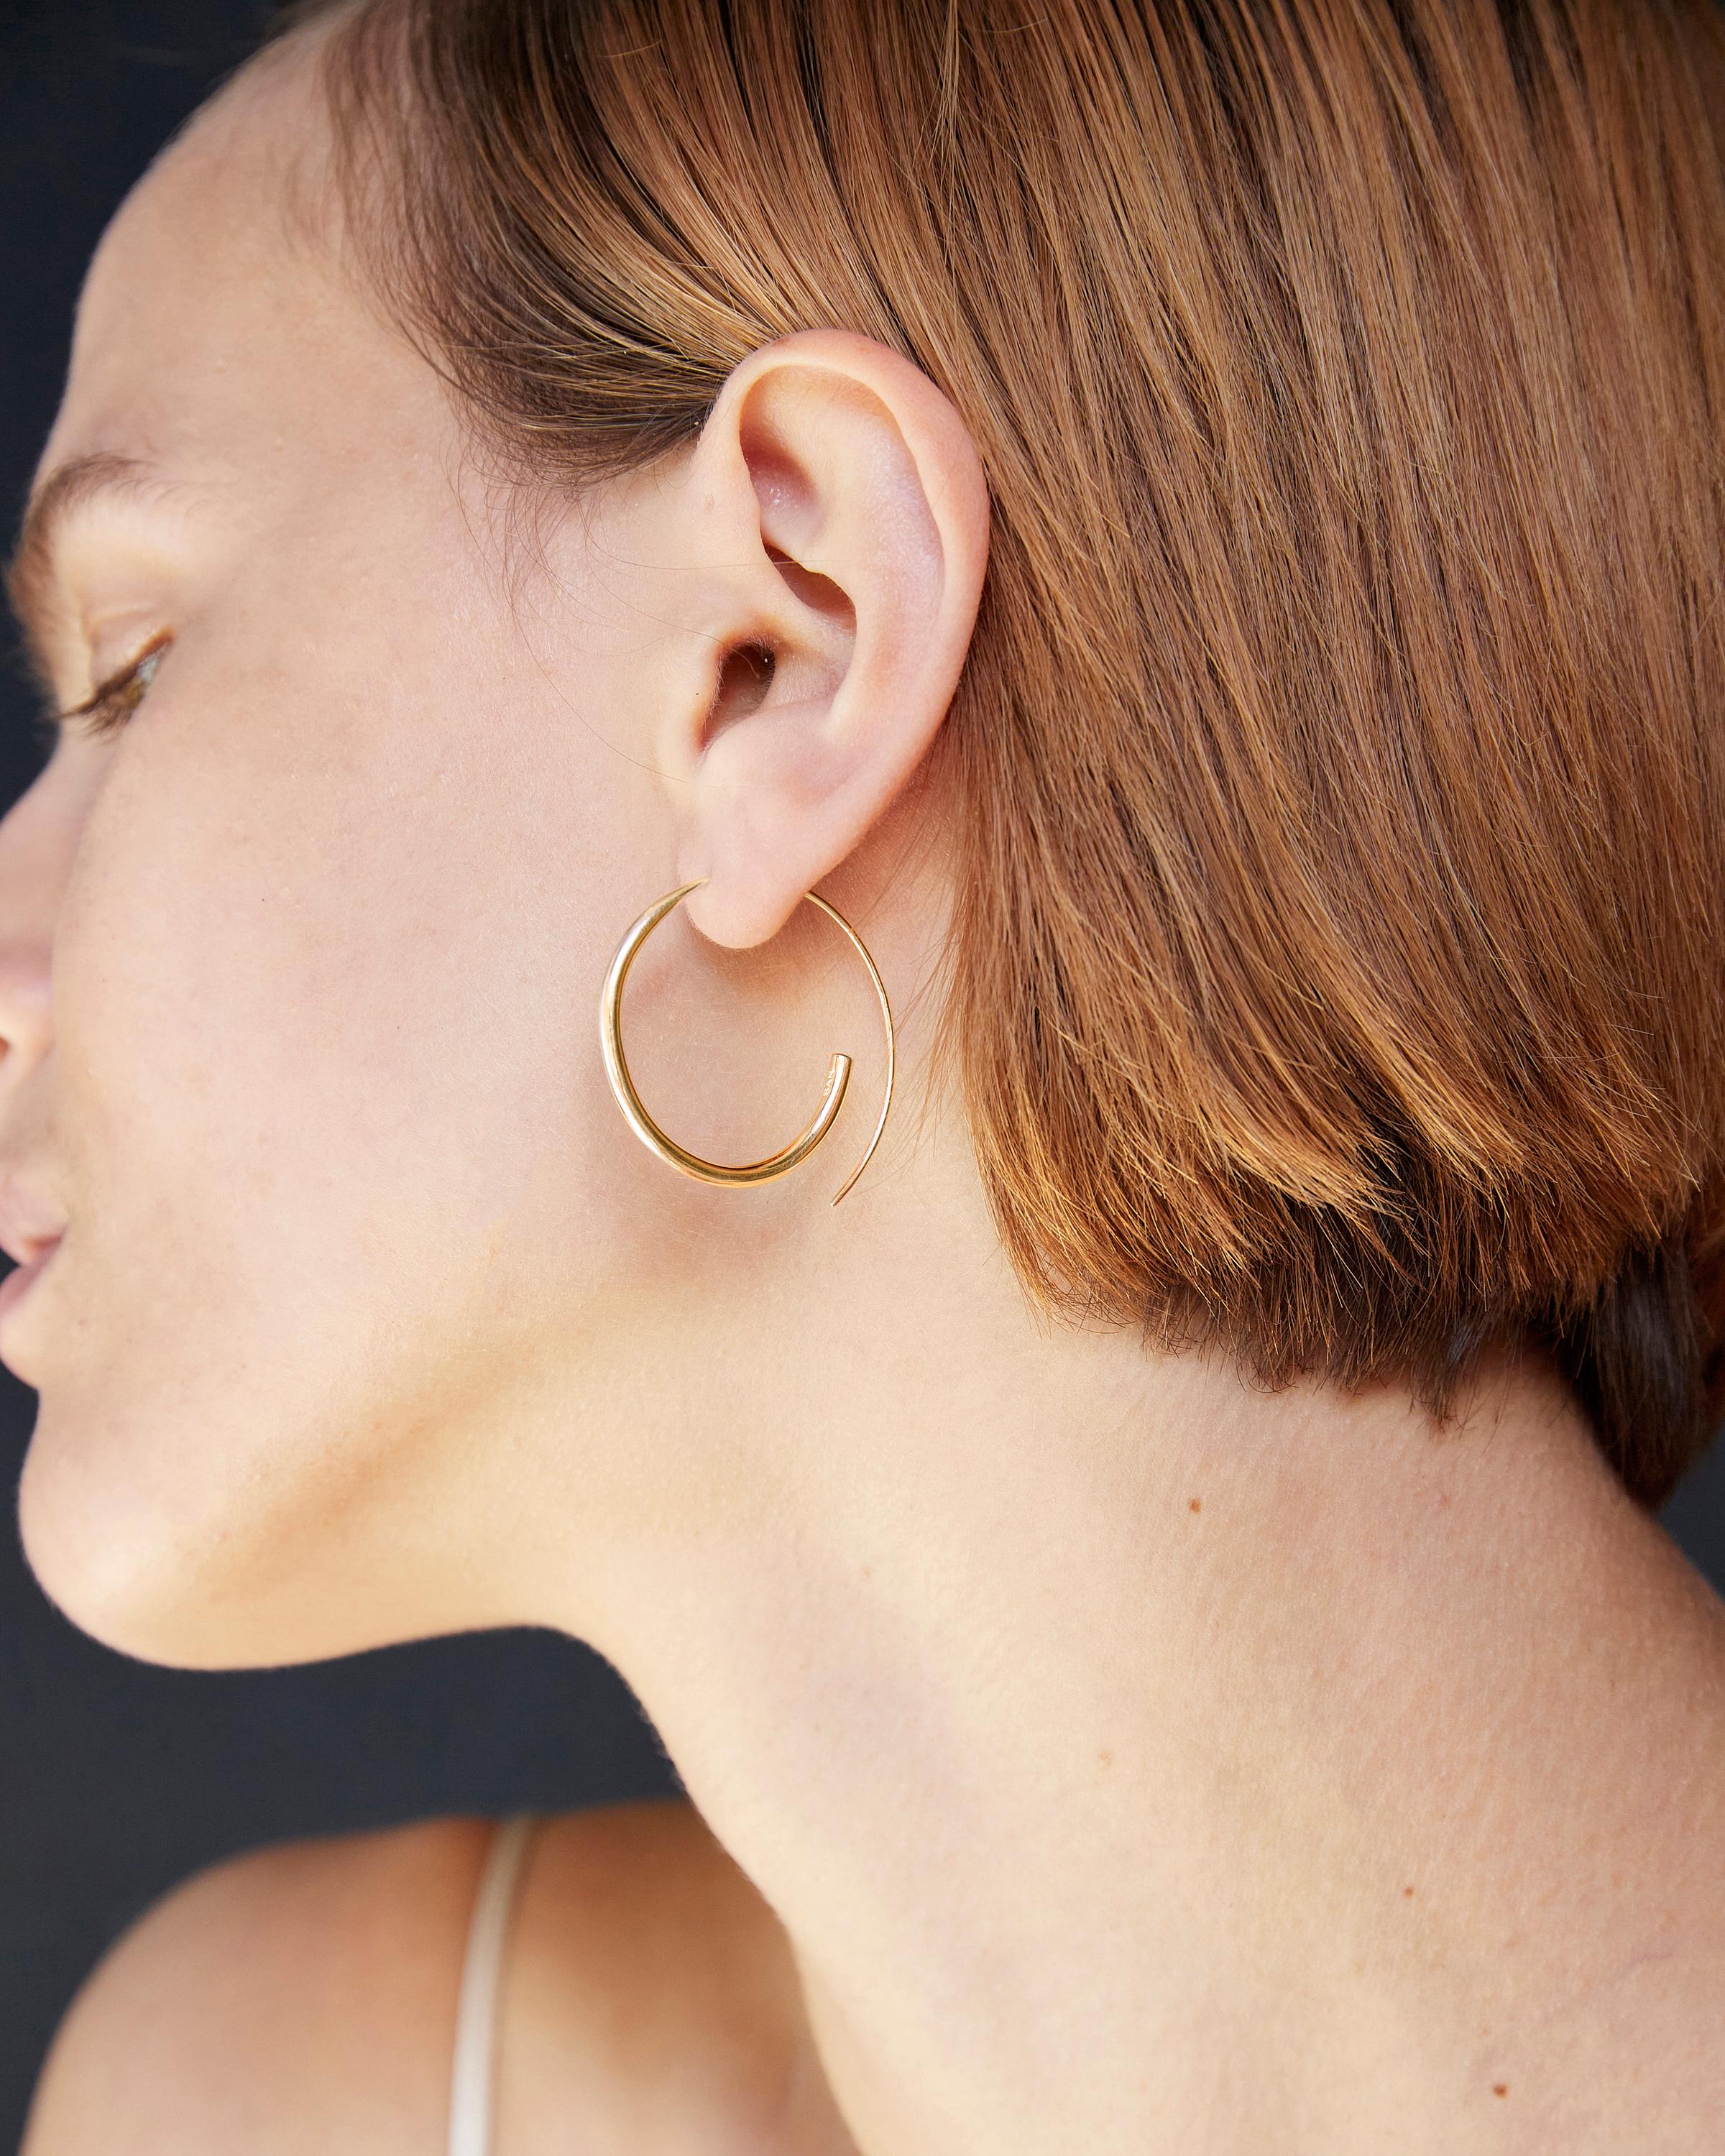 BAR Jewellery, London UK, ARC EARRINGS, Gold Plated 

Classic hoop earrings with a refined edge. Lightweight and versatile making them perfect for everyday wear.

Recycled sterling silver with 18ct gold plating
Drop: 3cm
Width at widest point: